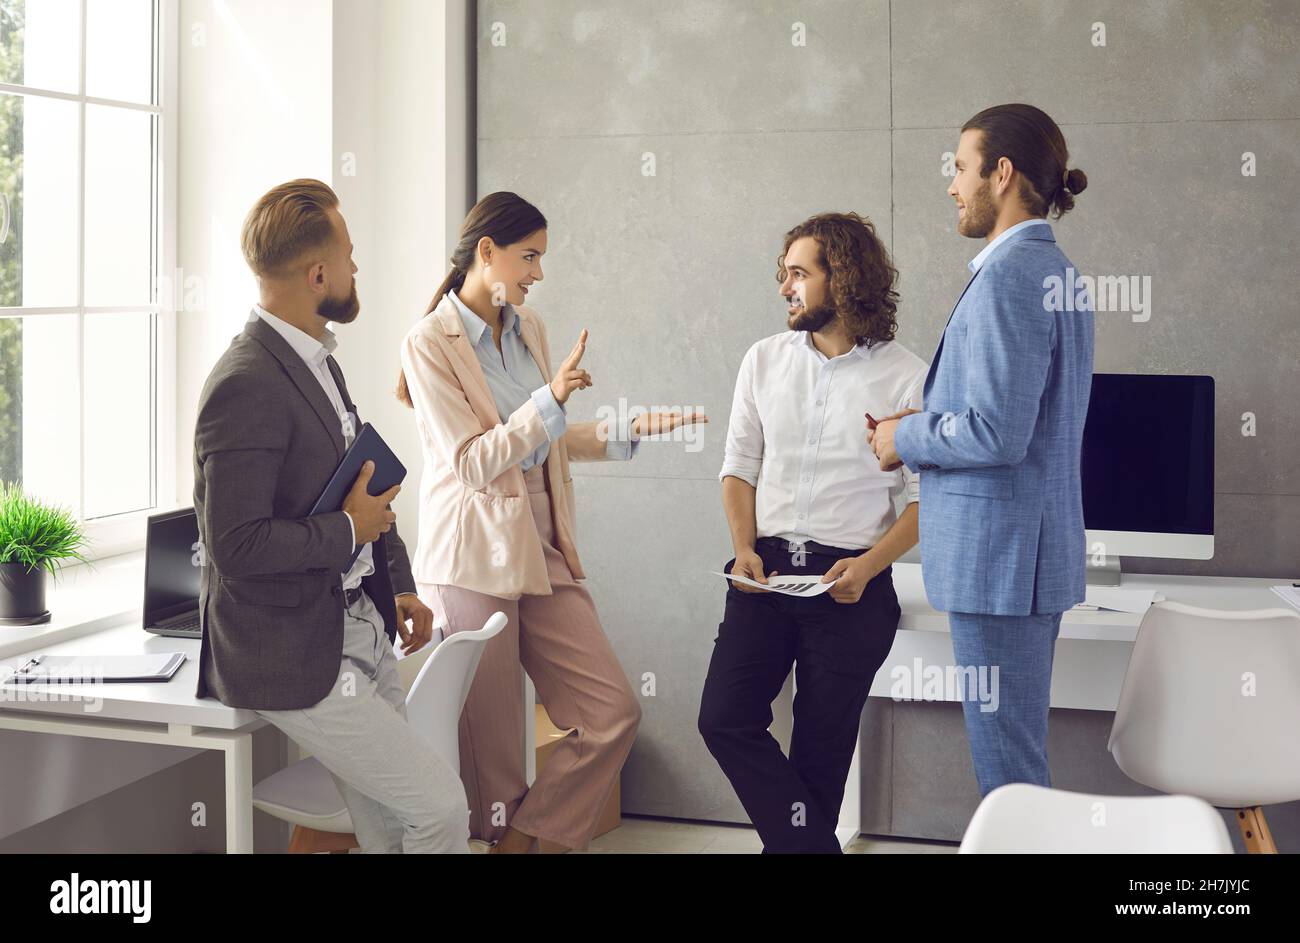 Team of business people discussing something during a work meeting in the office Stock Photo